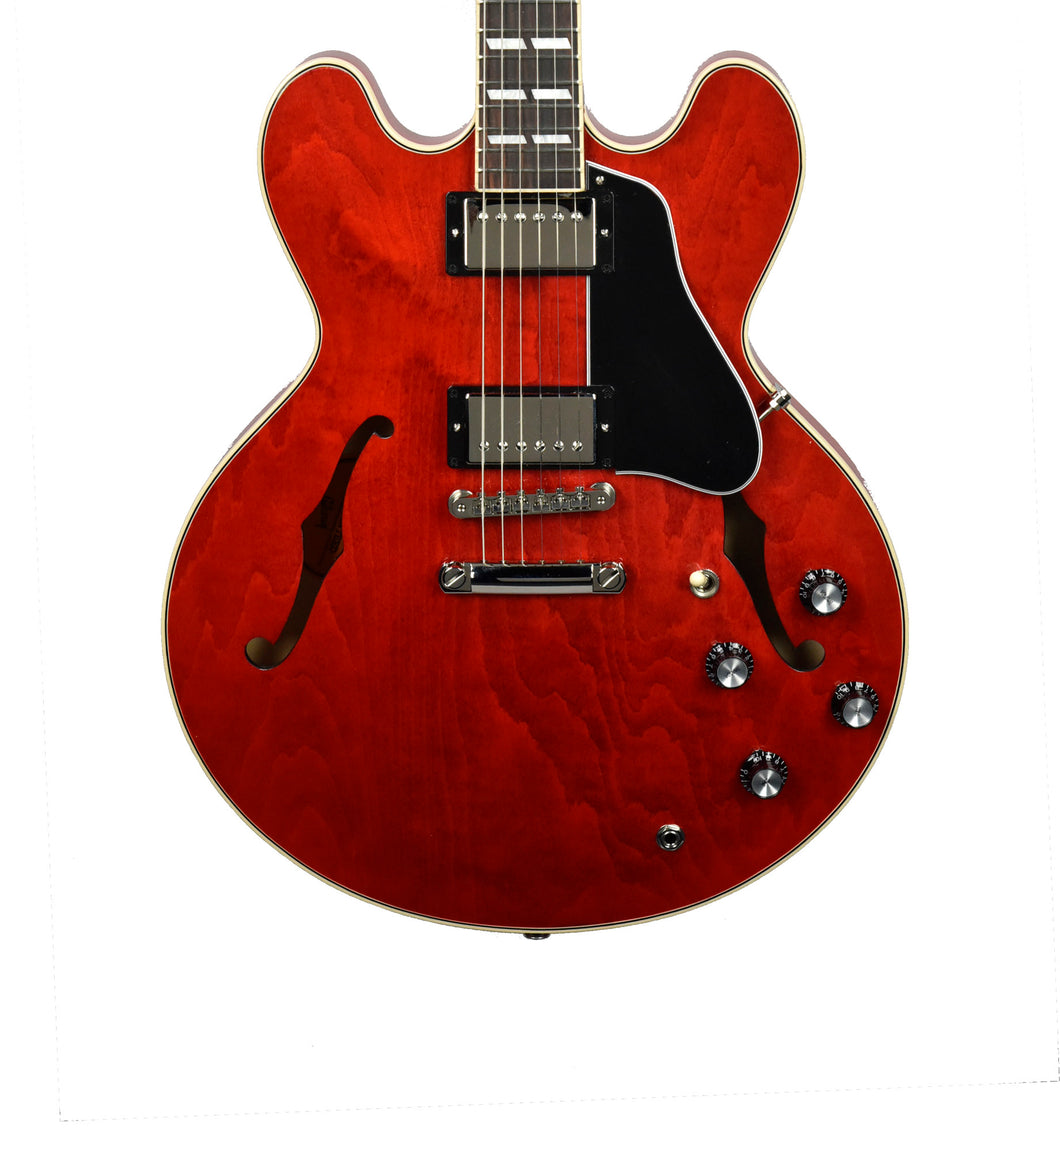 Gibson ES-345 Semi-Hollow Electric Guitar in 60s Cherry 233420182 - The Music Gallery